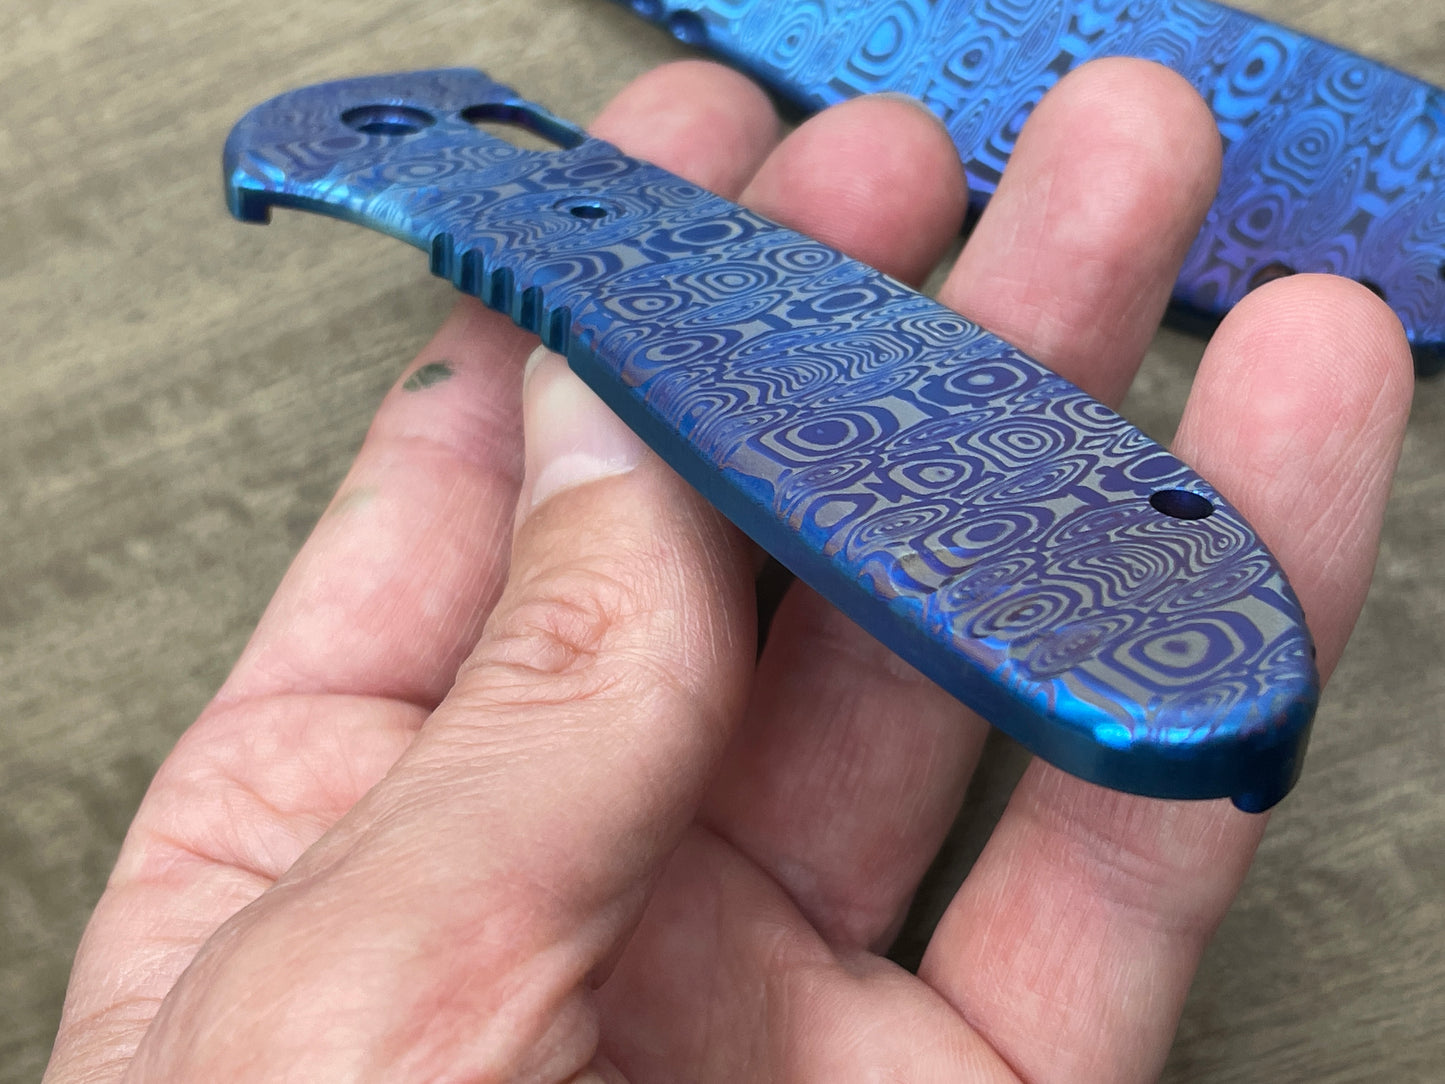 Flamed Dama LADDER pattern Titanium Scales for Benchmade GRIPTILIAN 551 & 550